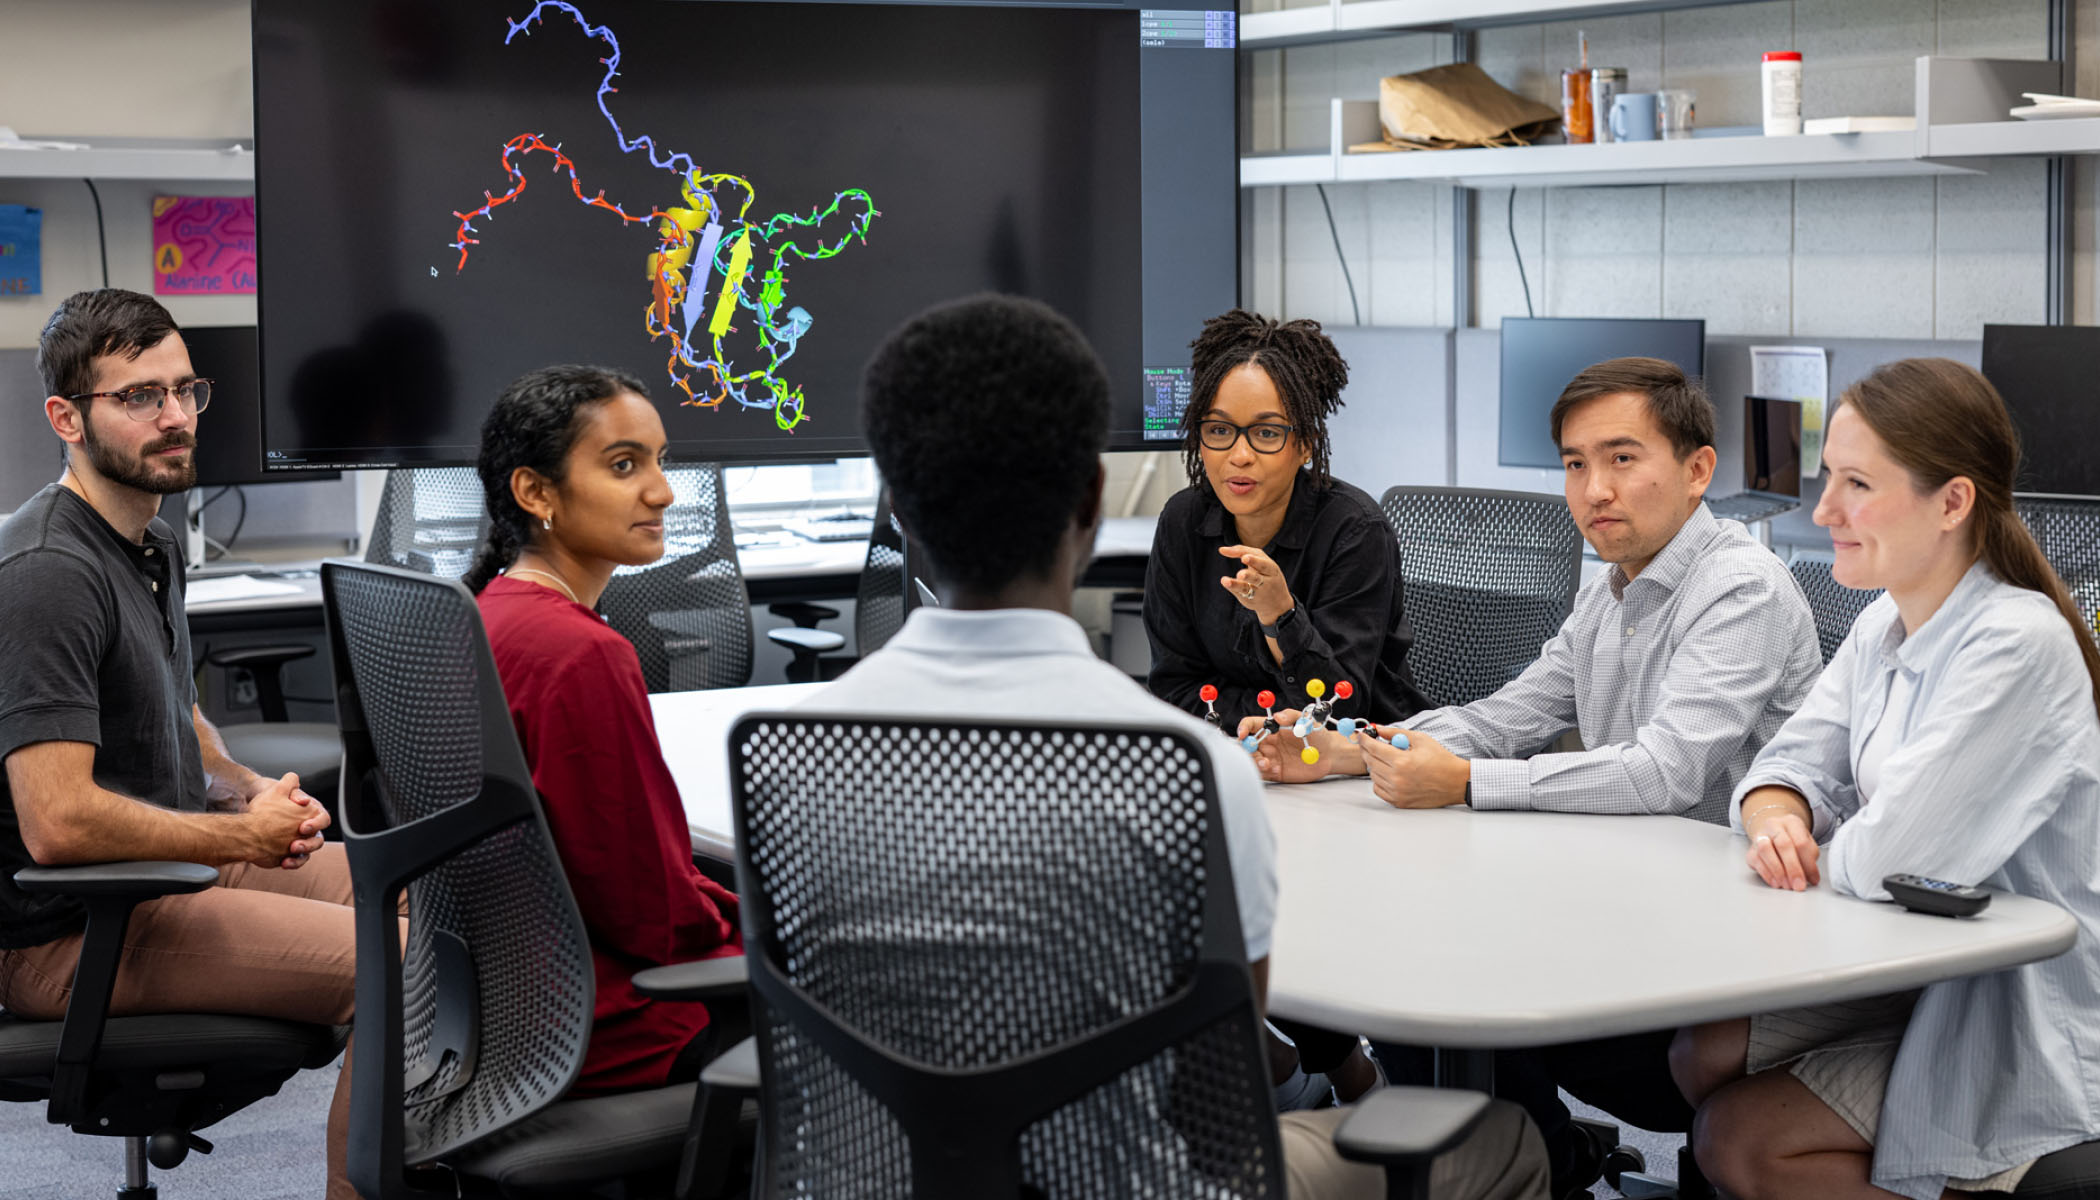 Group of researchers is sitting together at a table in a lab and talking with each other. In the background, a screen is shown depicting a photo of a protein.